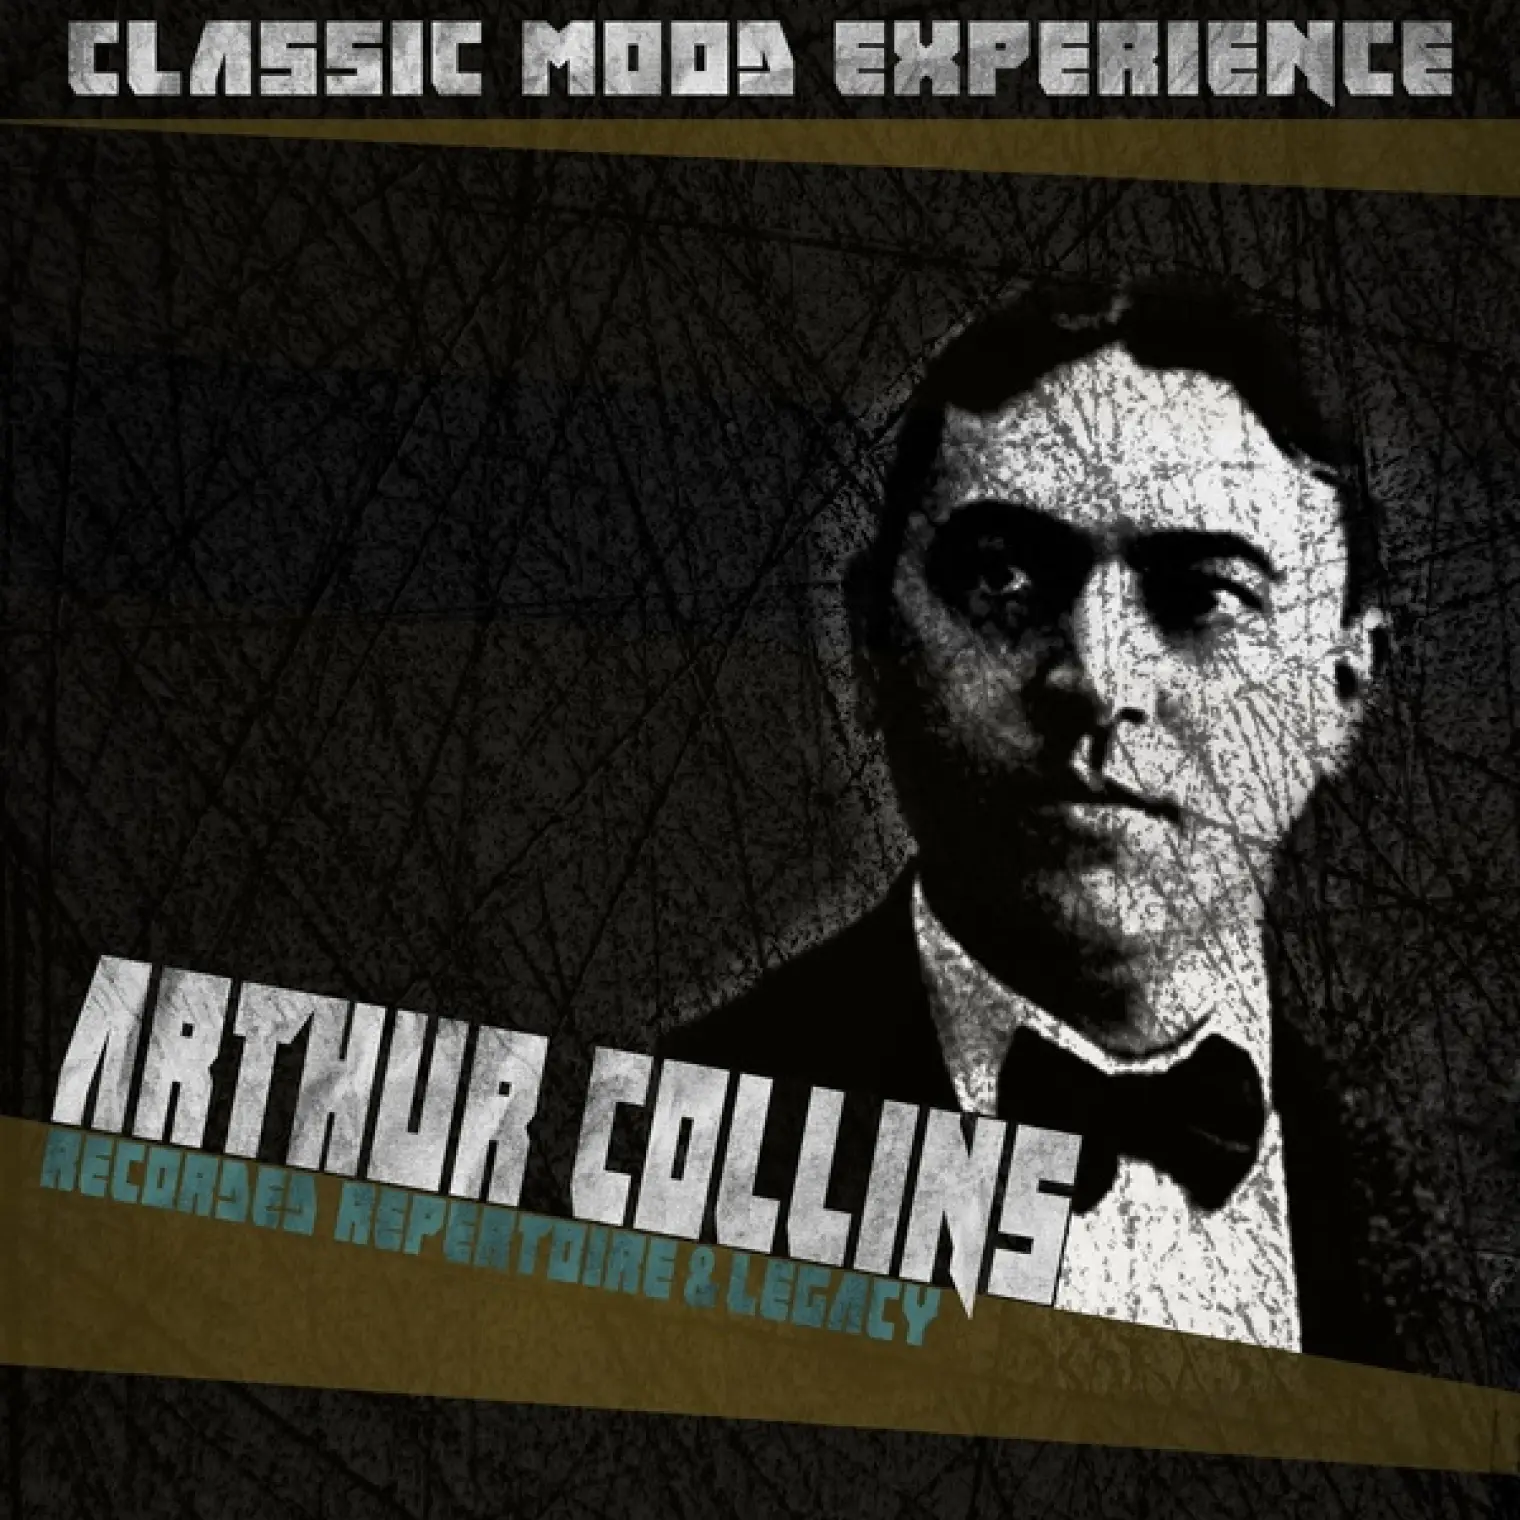 Recorded Repertoire & Legacy (Classic Mood Experience) -  Arthur Collins 